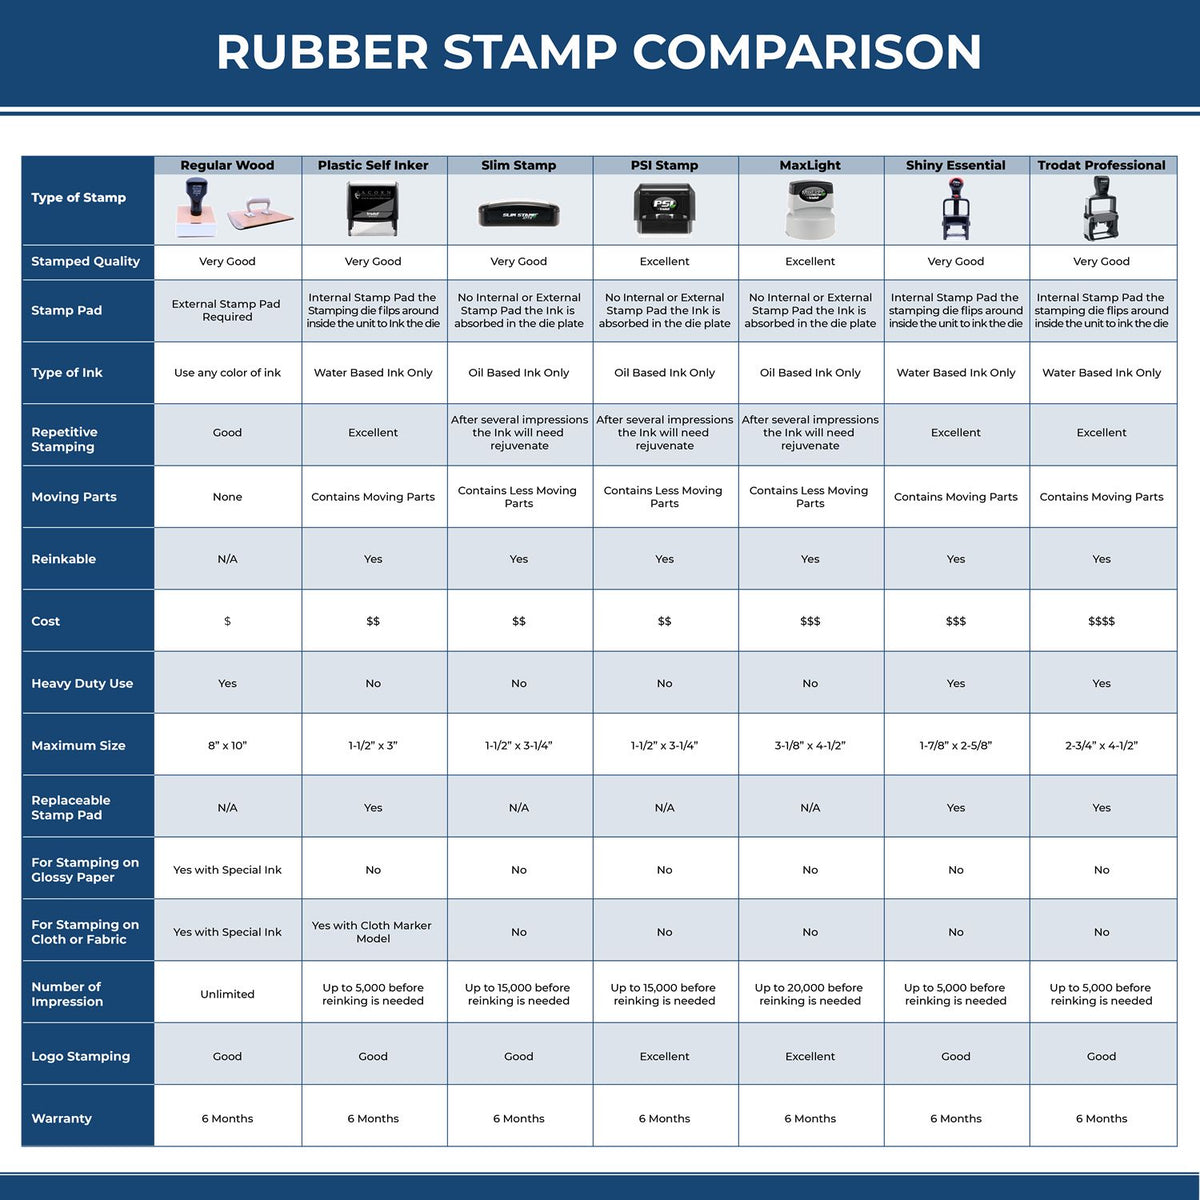 Narrow Posted Rubber Stamp 4432R Rubber Stamp Comparison